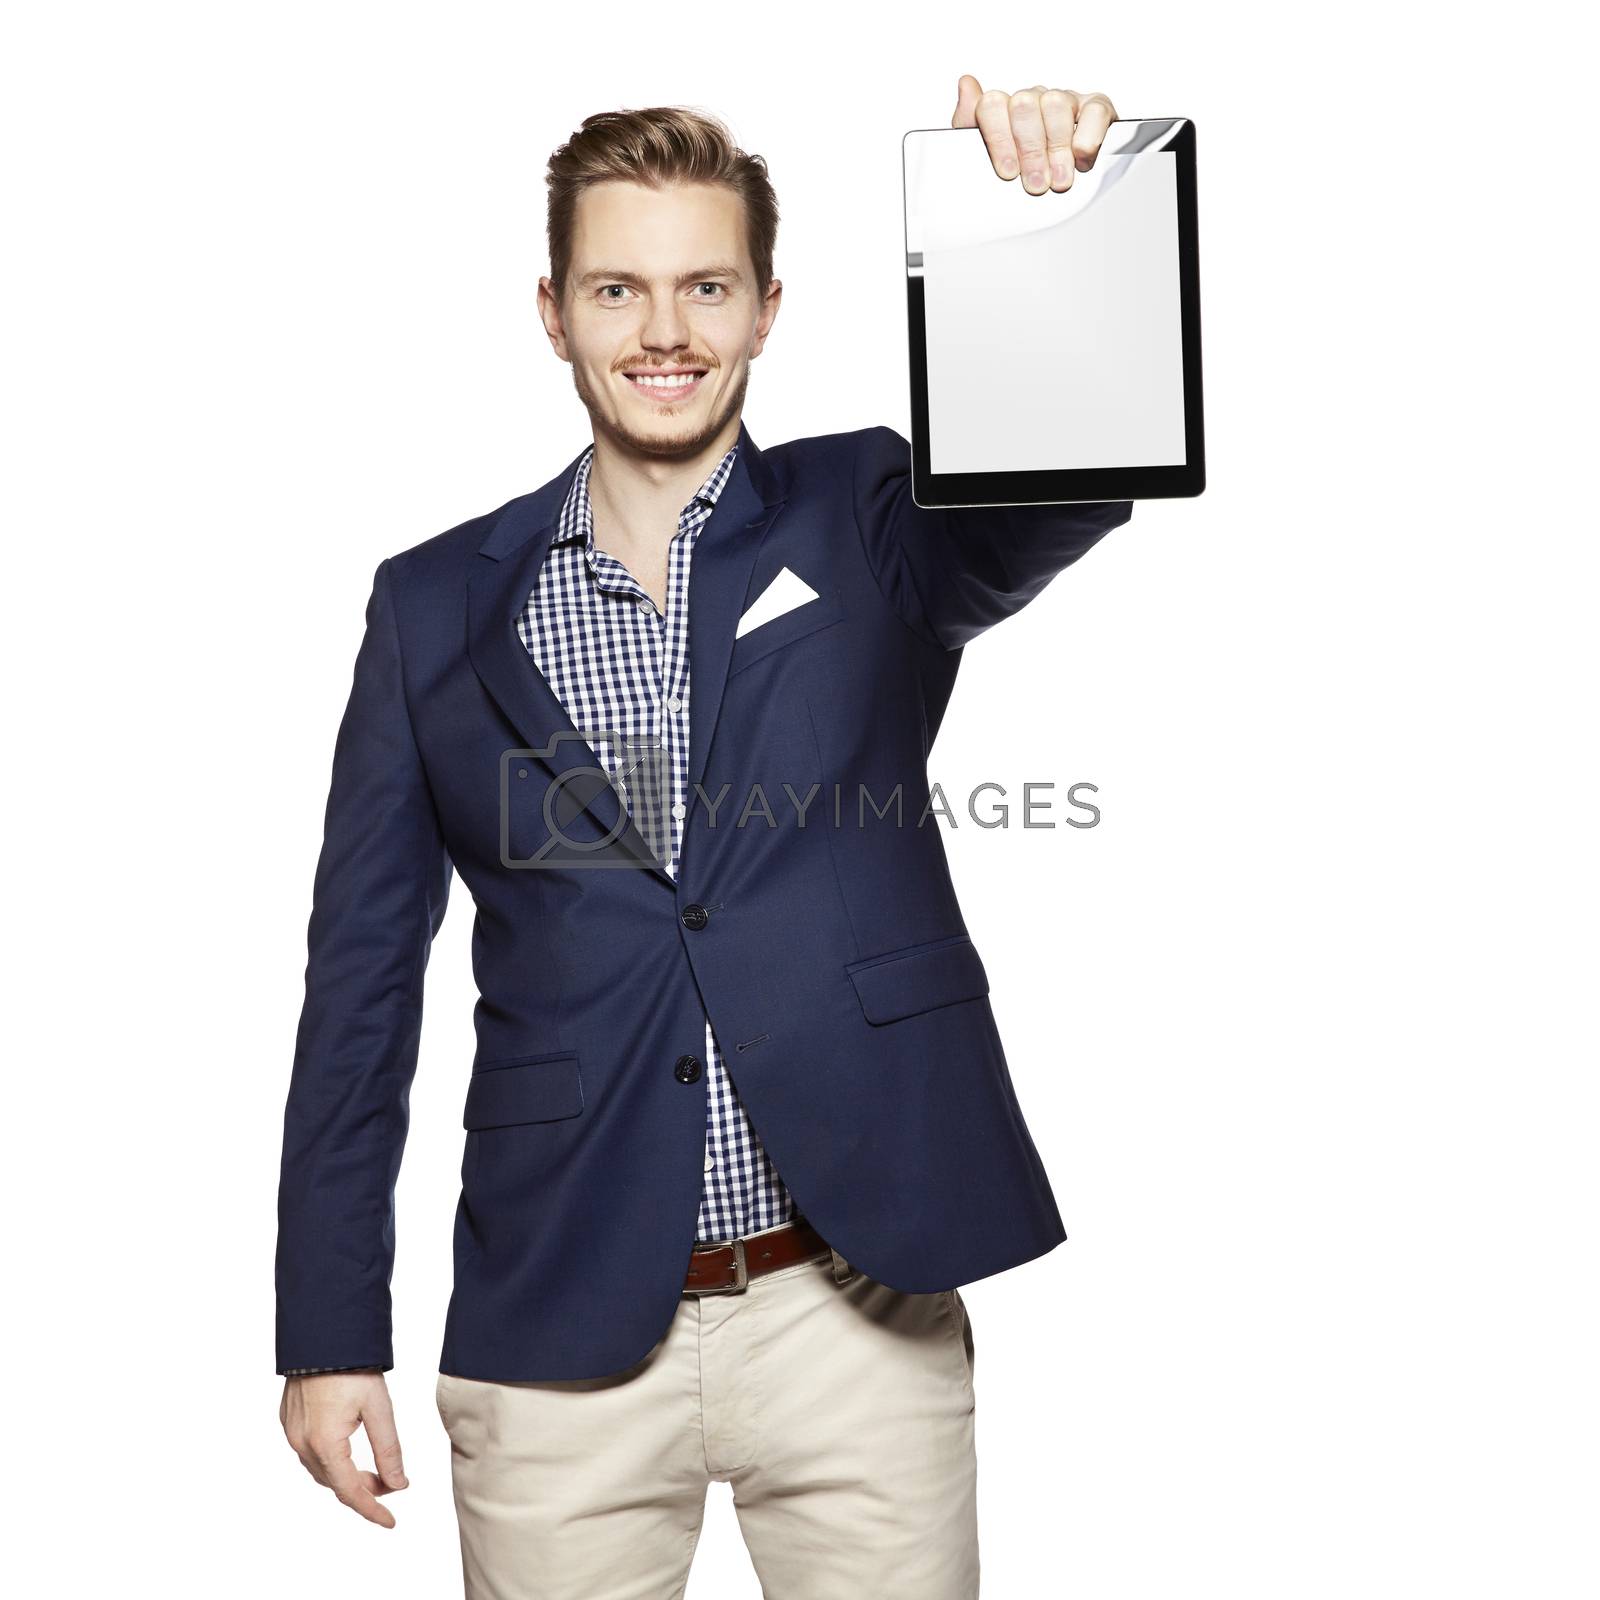 Royalty free image of Businessman holding a tablet by filipw